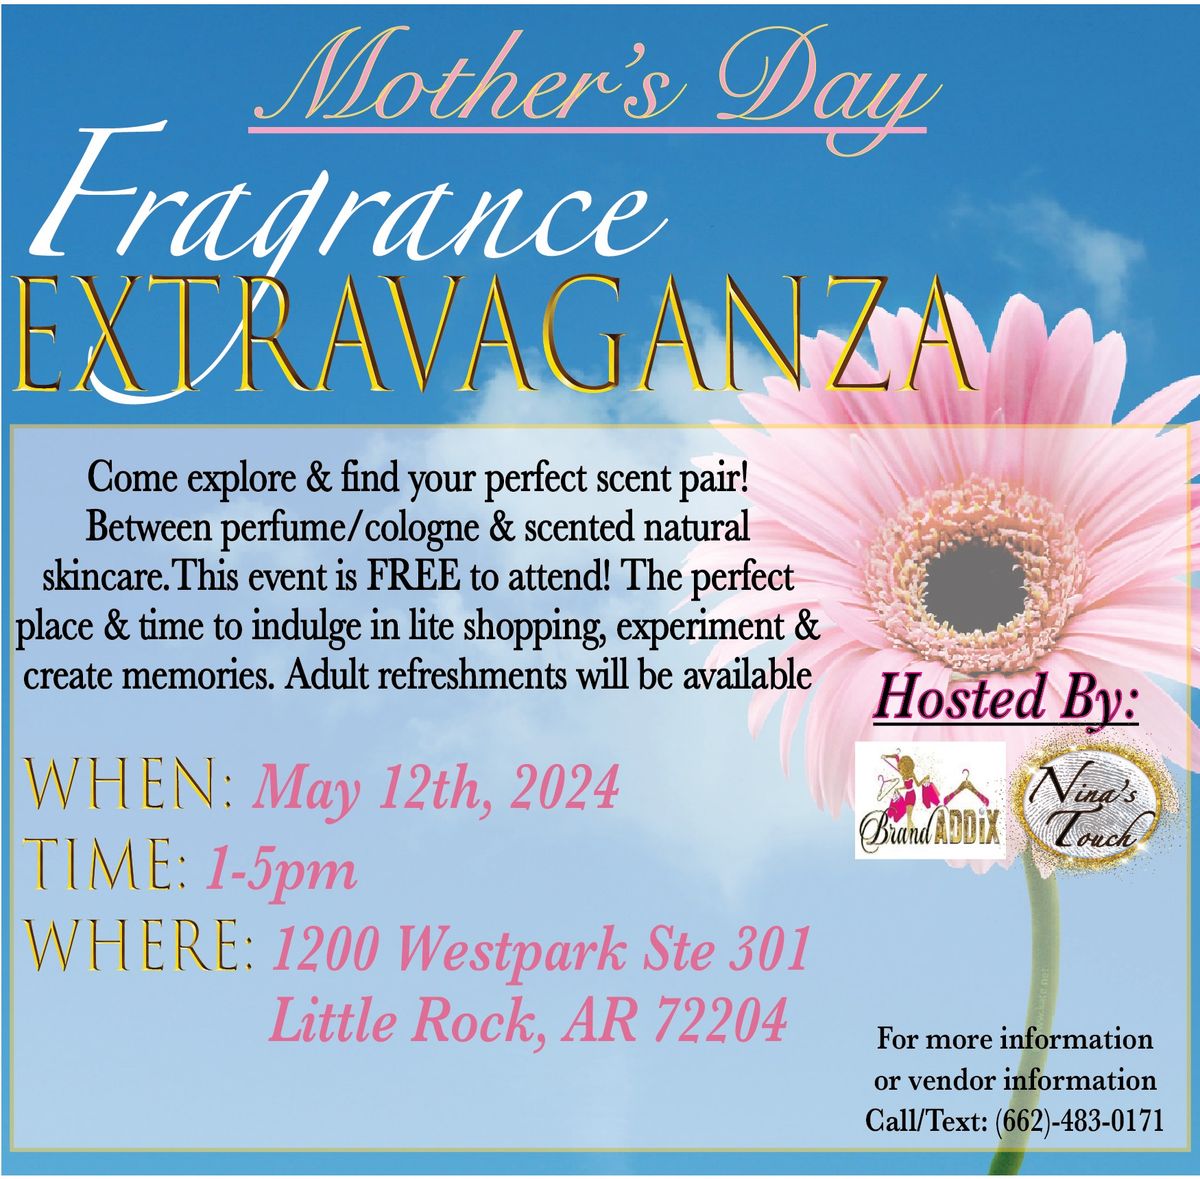 Mother's Day Fragrance Extravaganza 